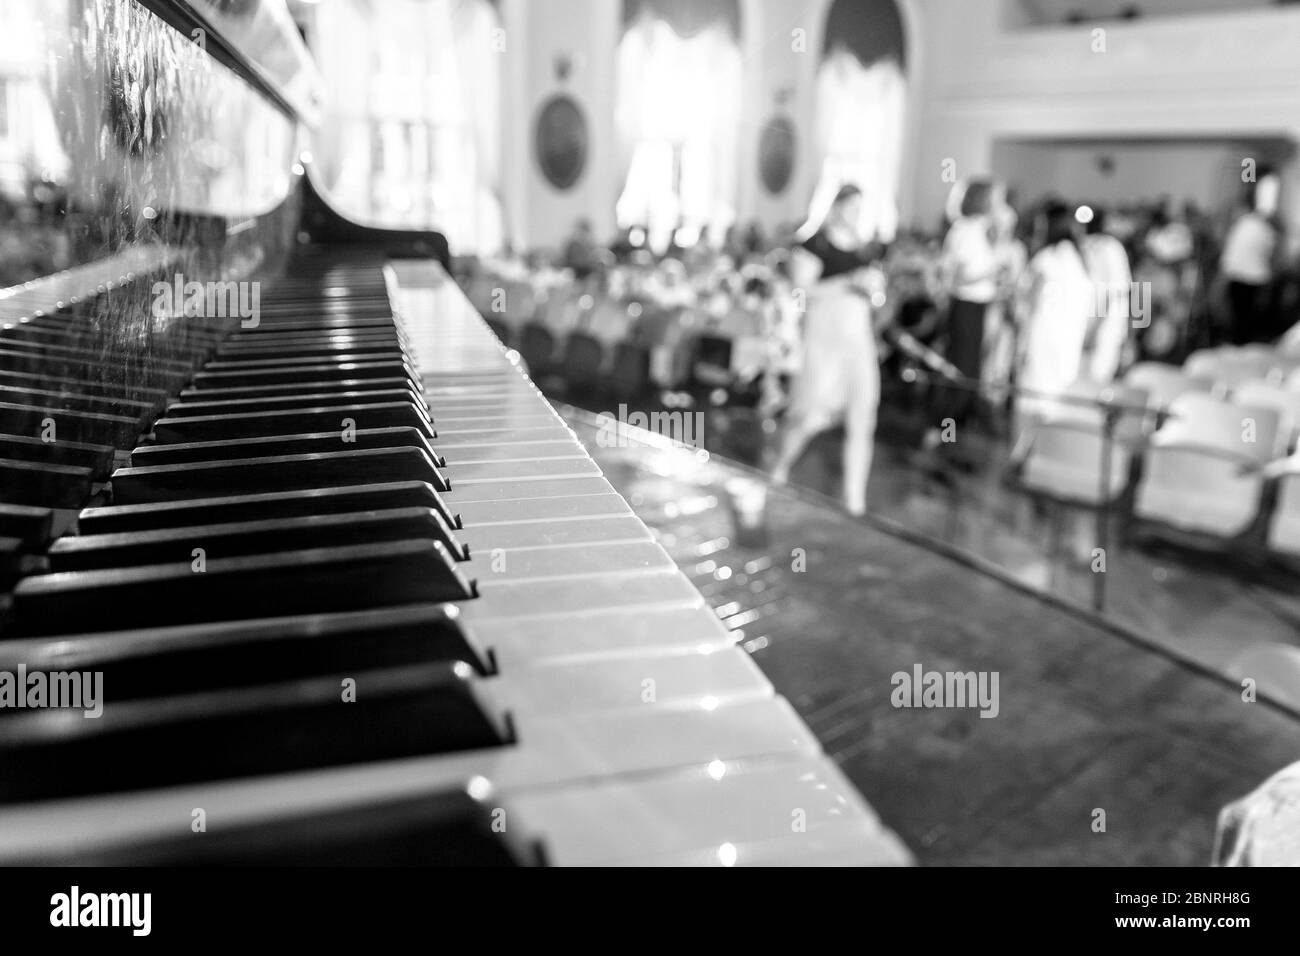 Piano keyboard in the hall with people Stock Photo